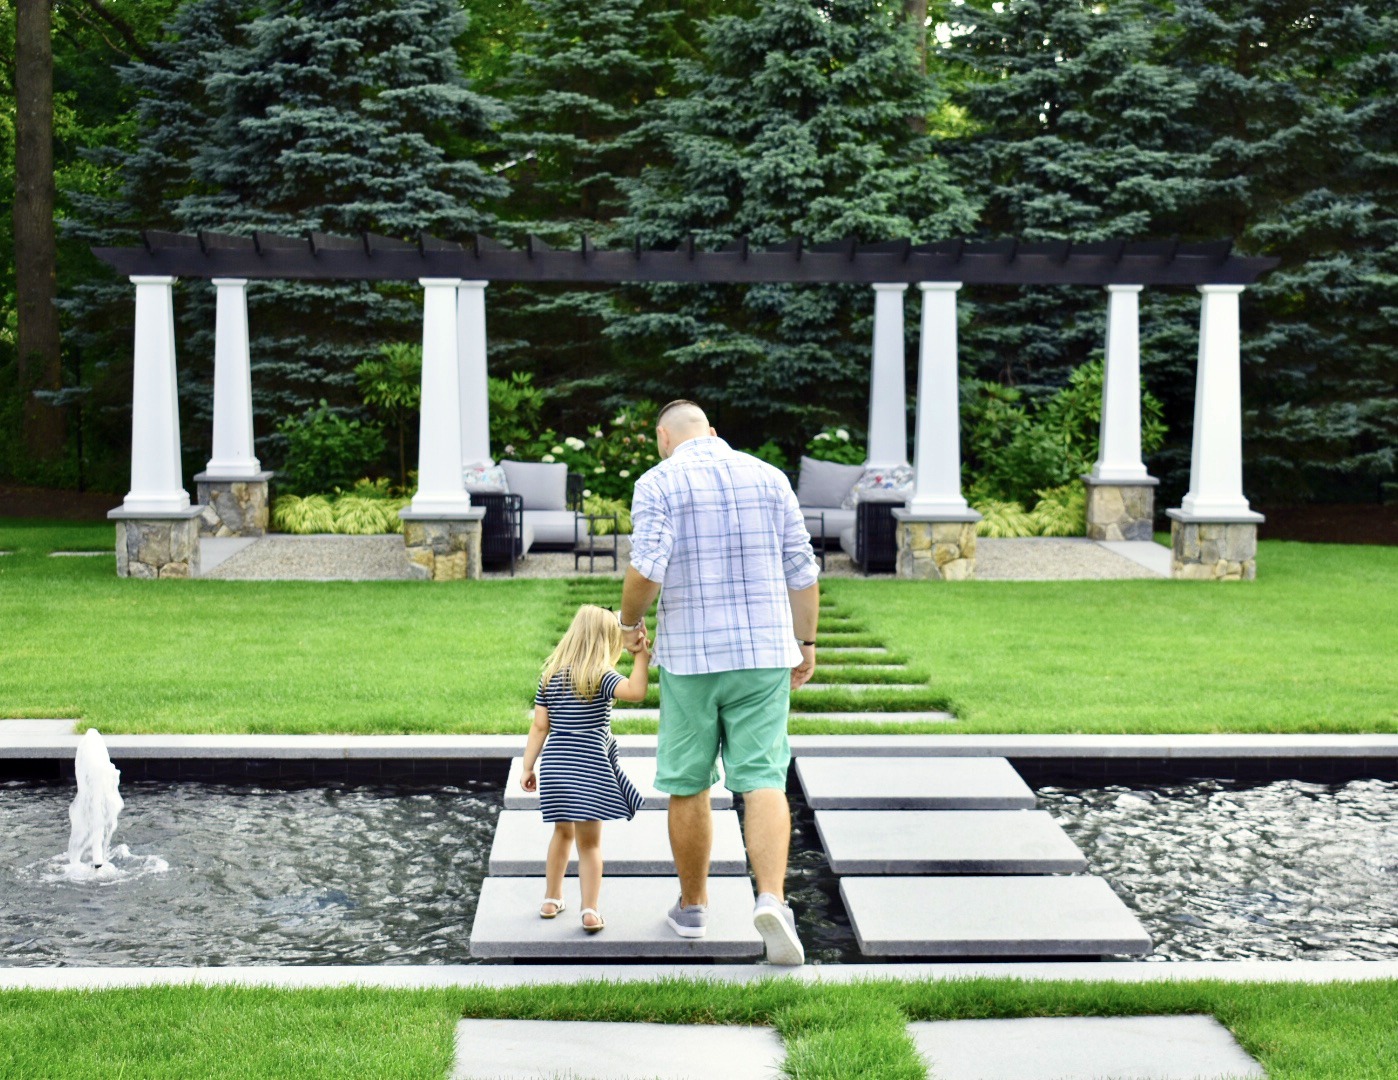 A person is walking with a child across stepping stones over a water feature in a lush garden with white columns and a pergola in the background.